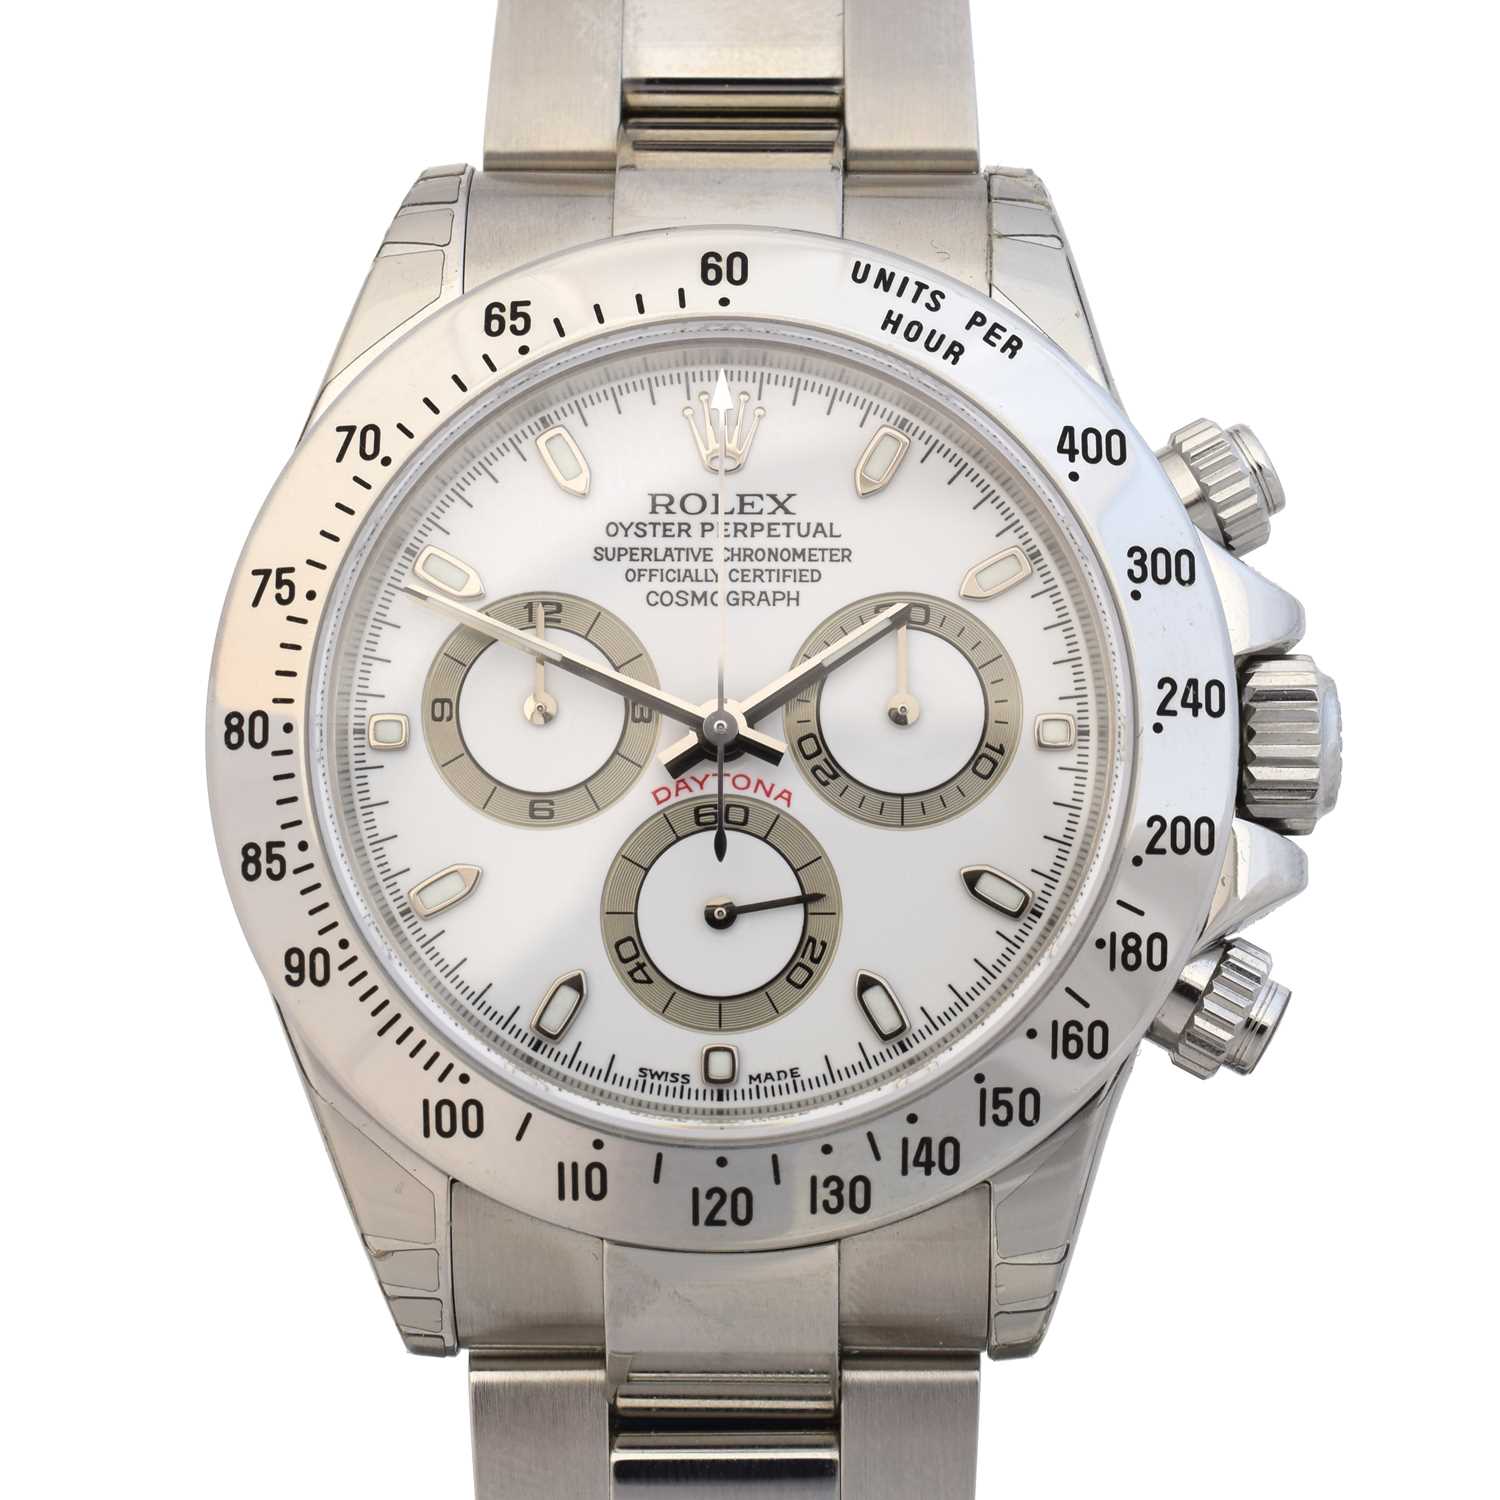 Lot A stainless steel Rolex Oyster Perpetual Cosmograph Daytona wristwatch